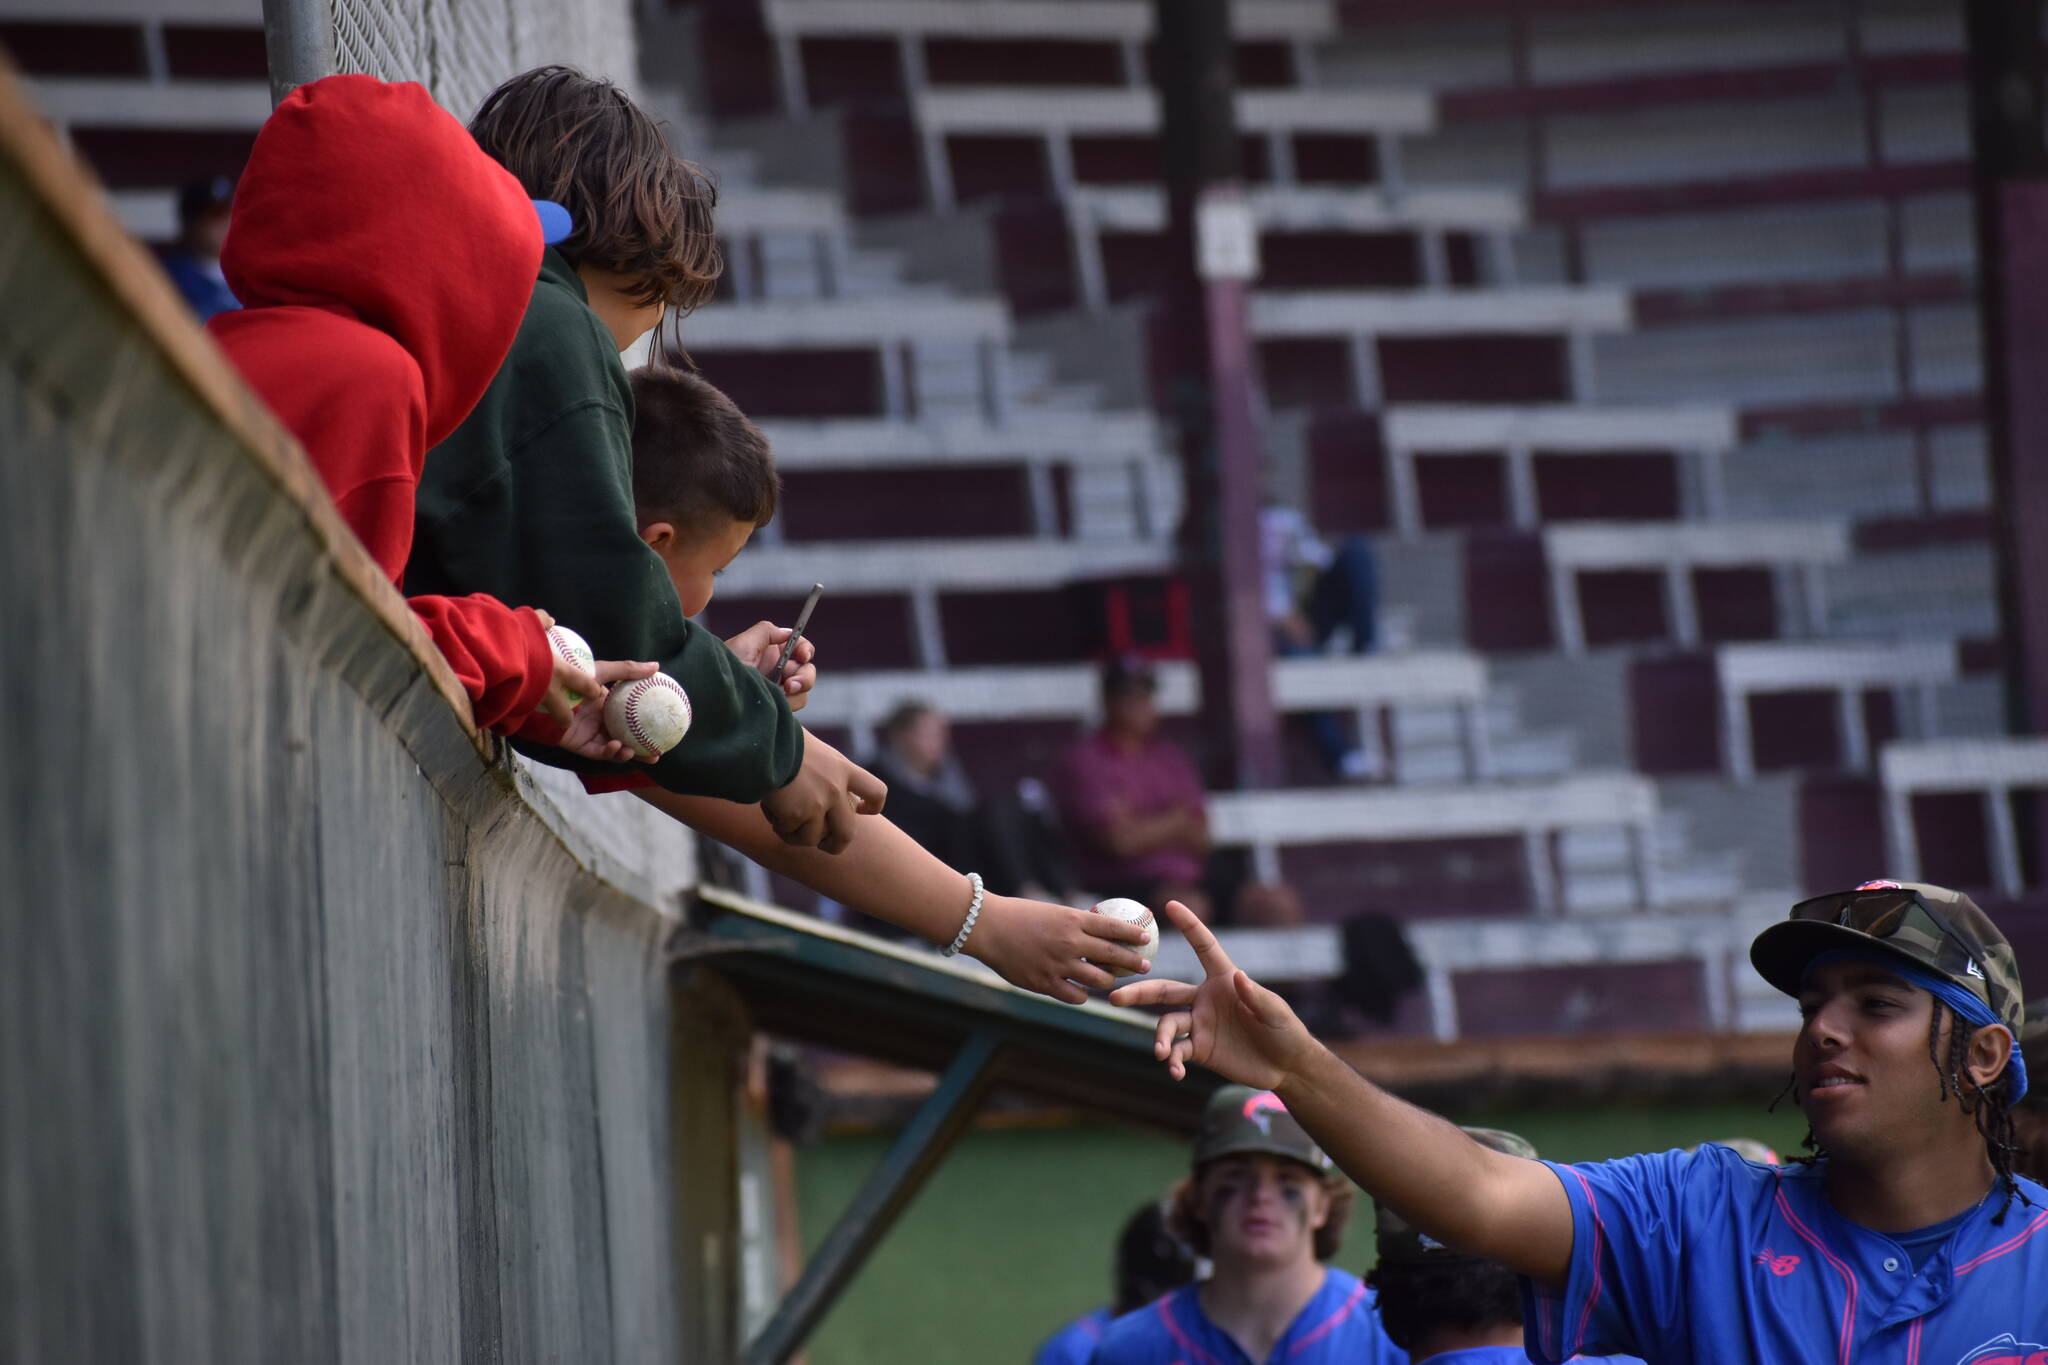 From left: Little leaguers Alonso Aguilar, William Ward and Brayden Jeremiah receive autographs from Josephan Gonzalez.